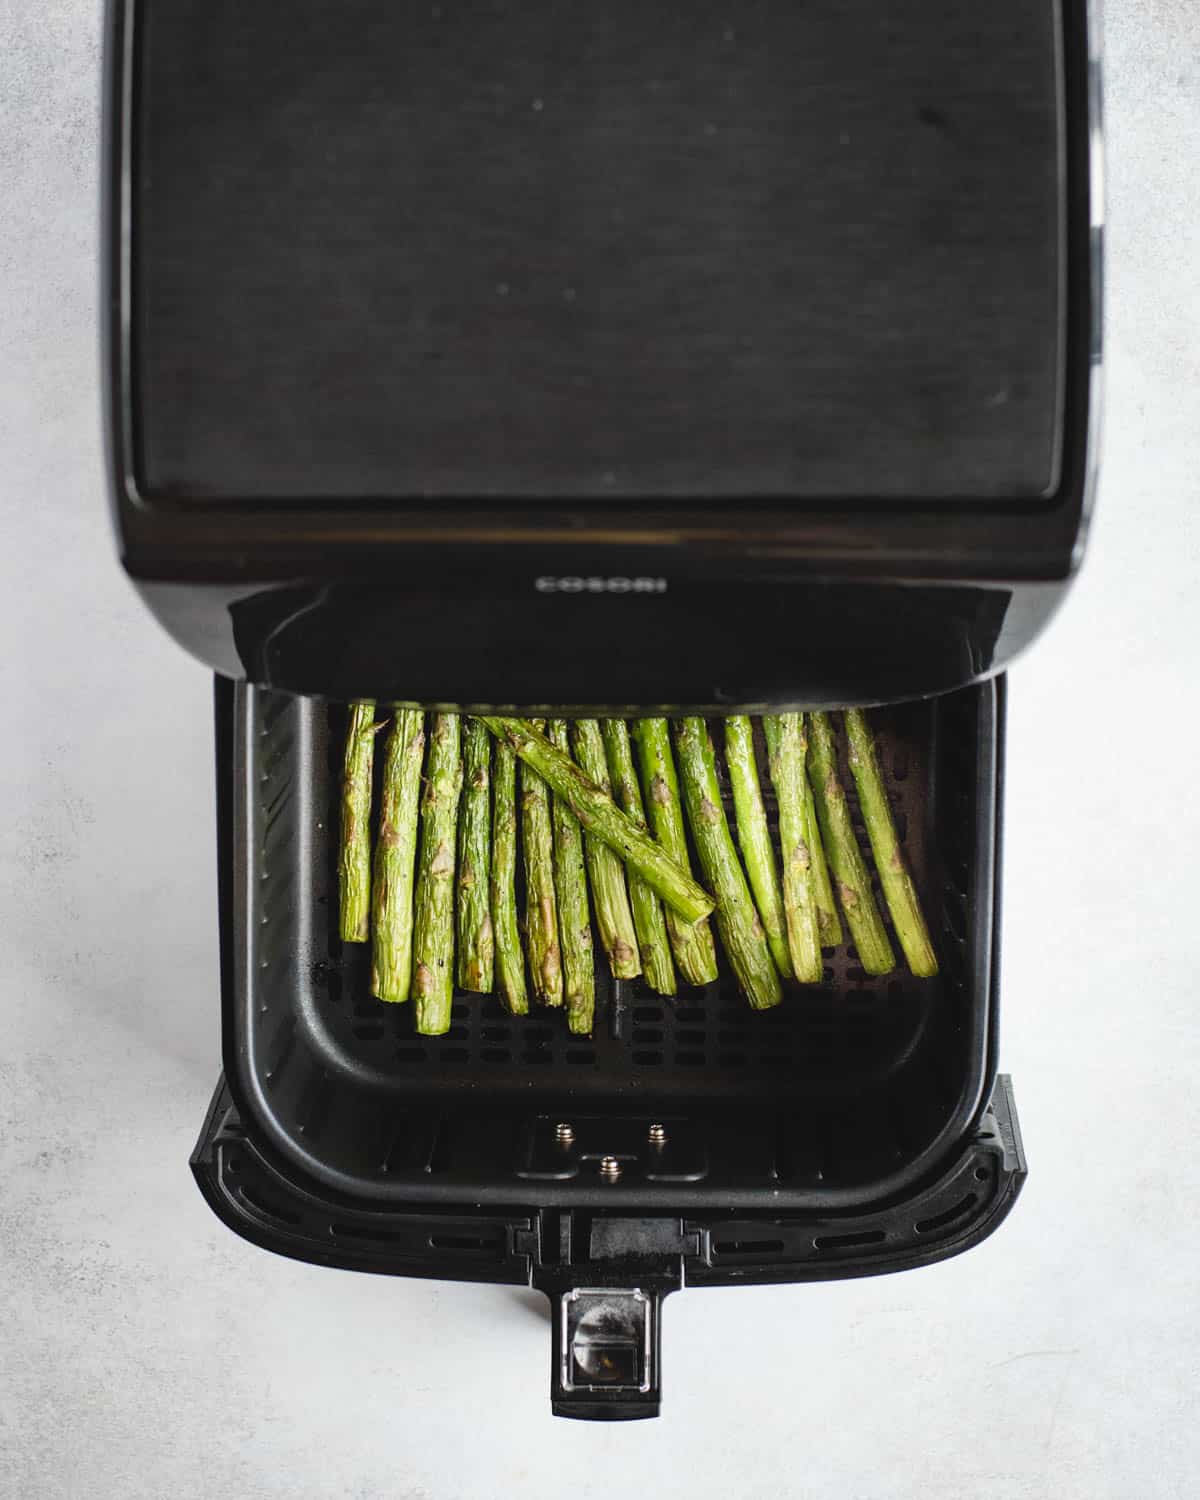 cooked asparagus in an air fryer basket that is half way pulled out of the air fryer